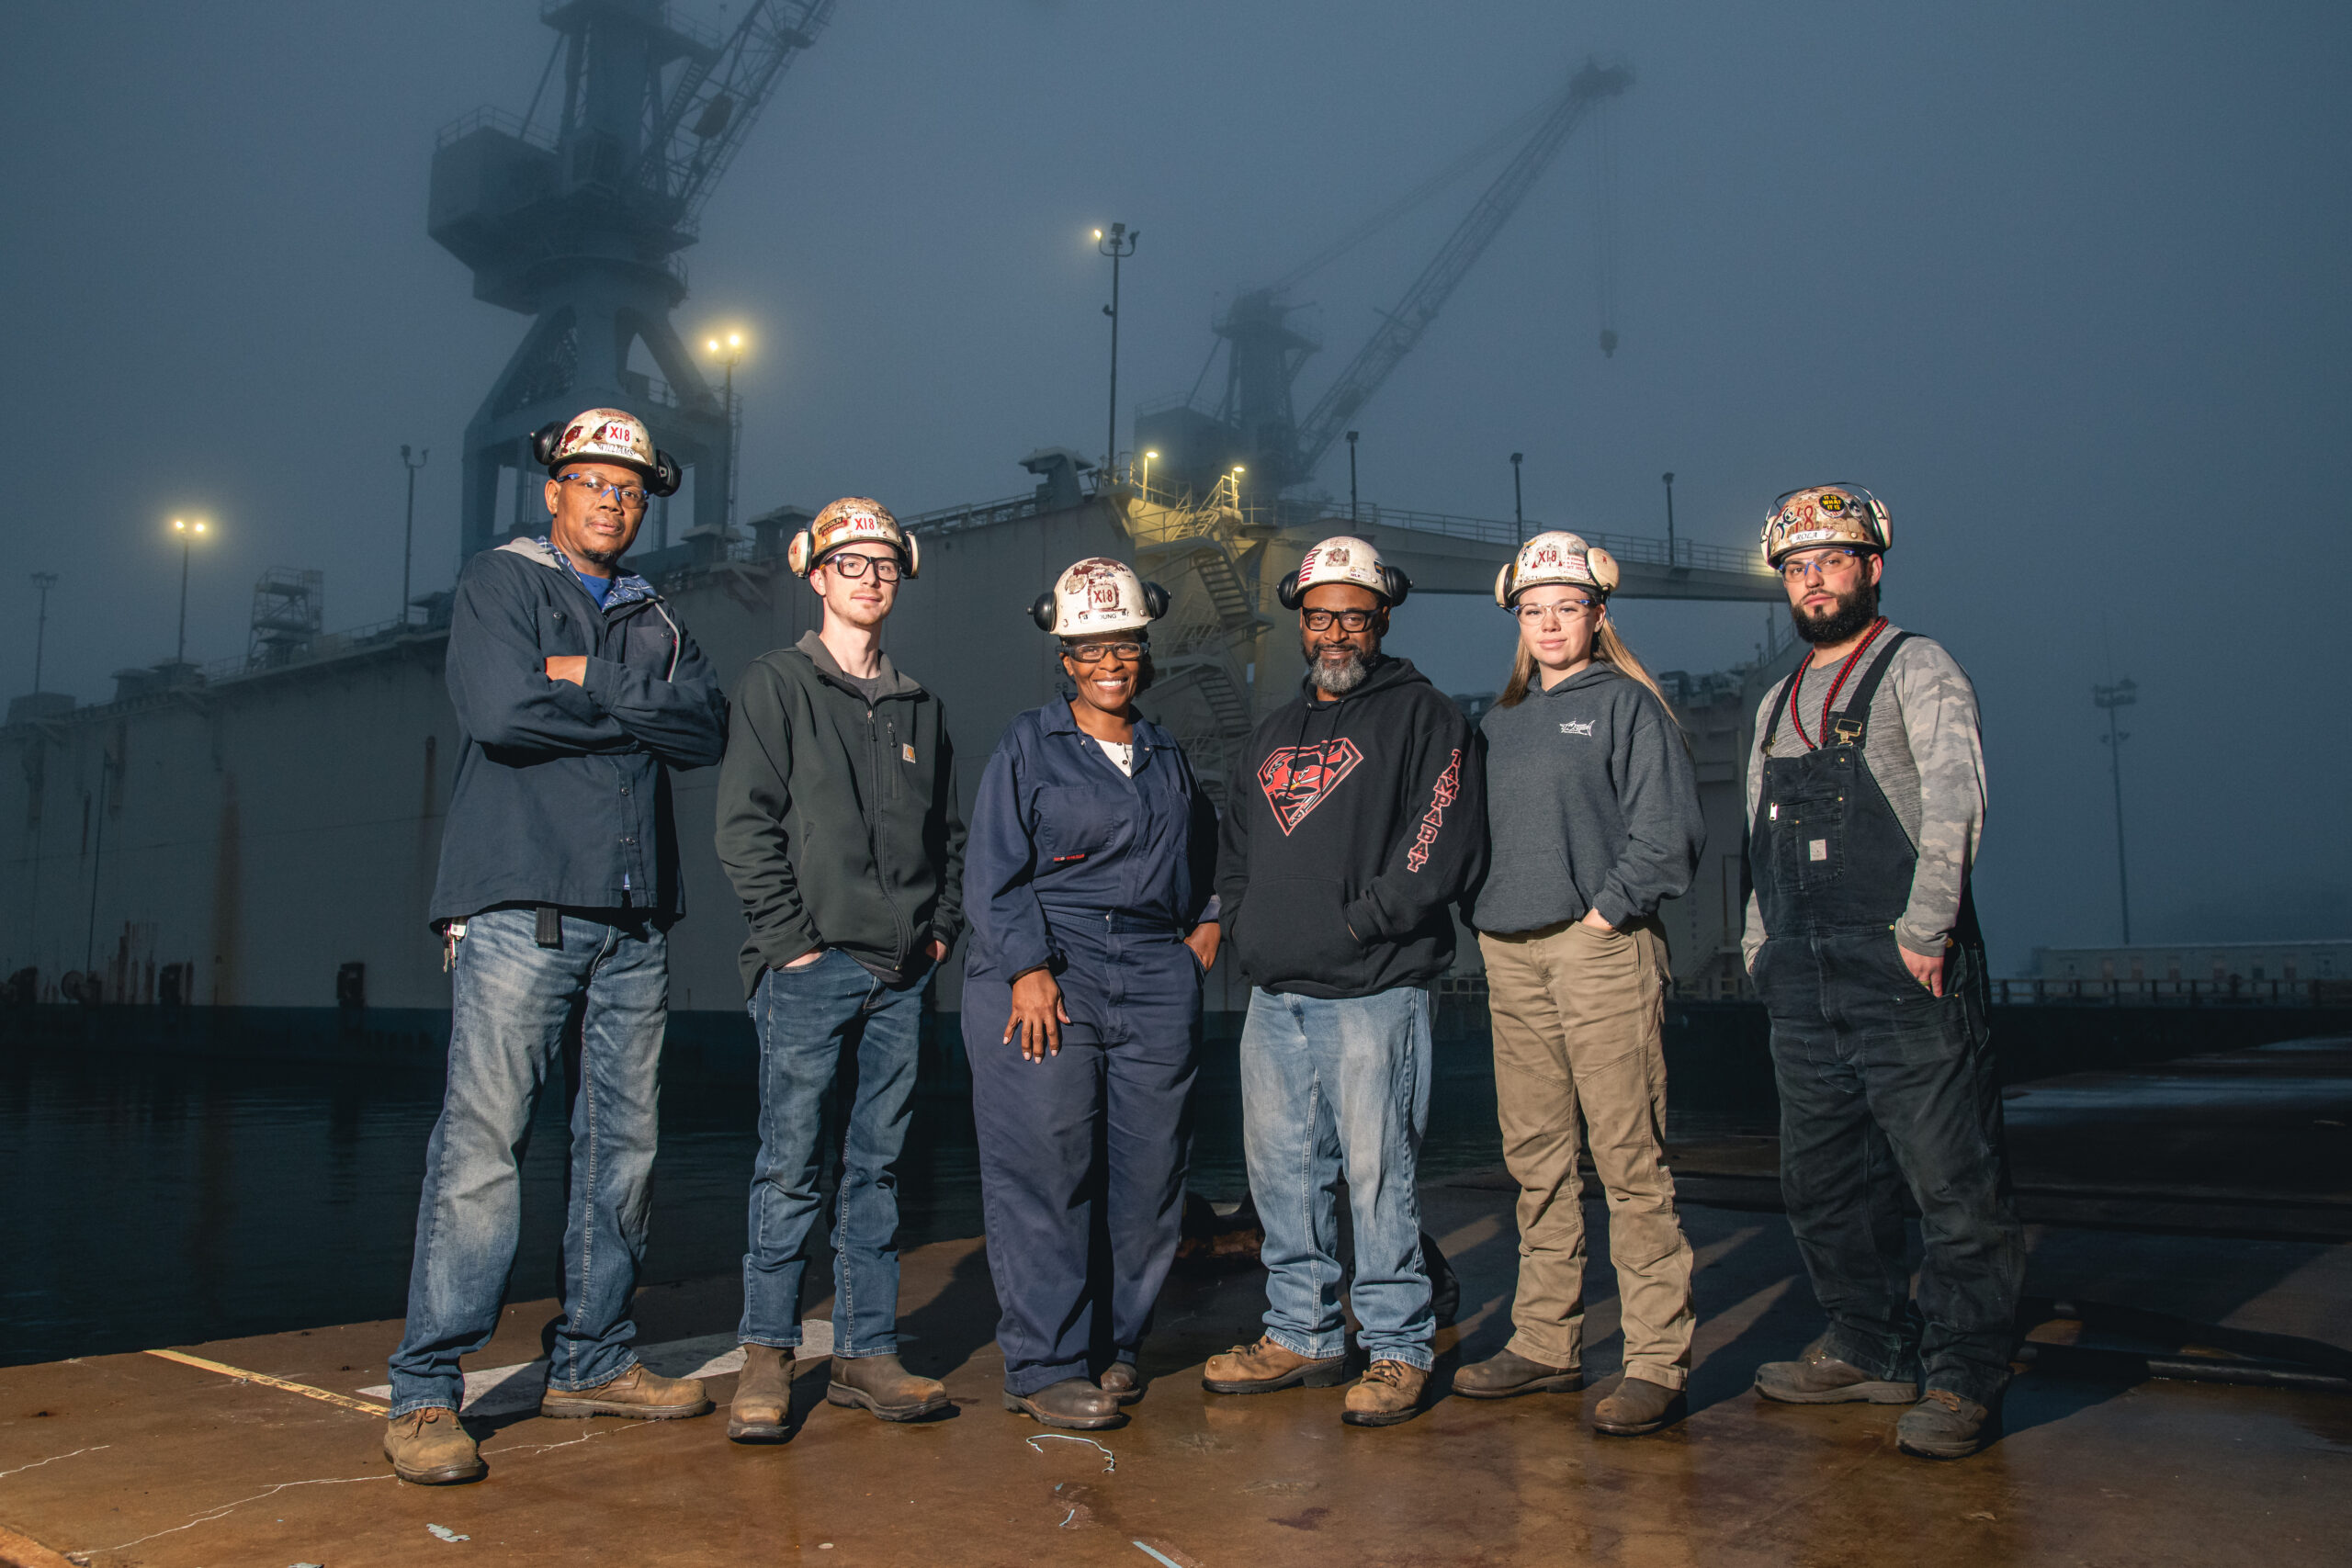 Newport News Shipbuilding welders who will participate in the ceremonial keel laying for Arkansas (SSN 800).